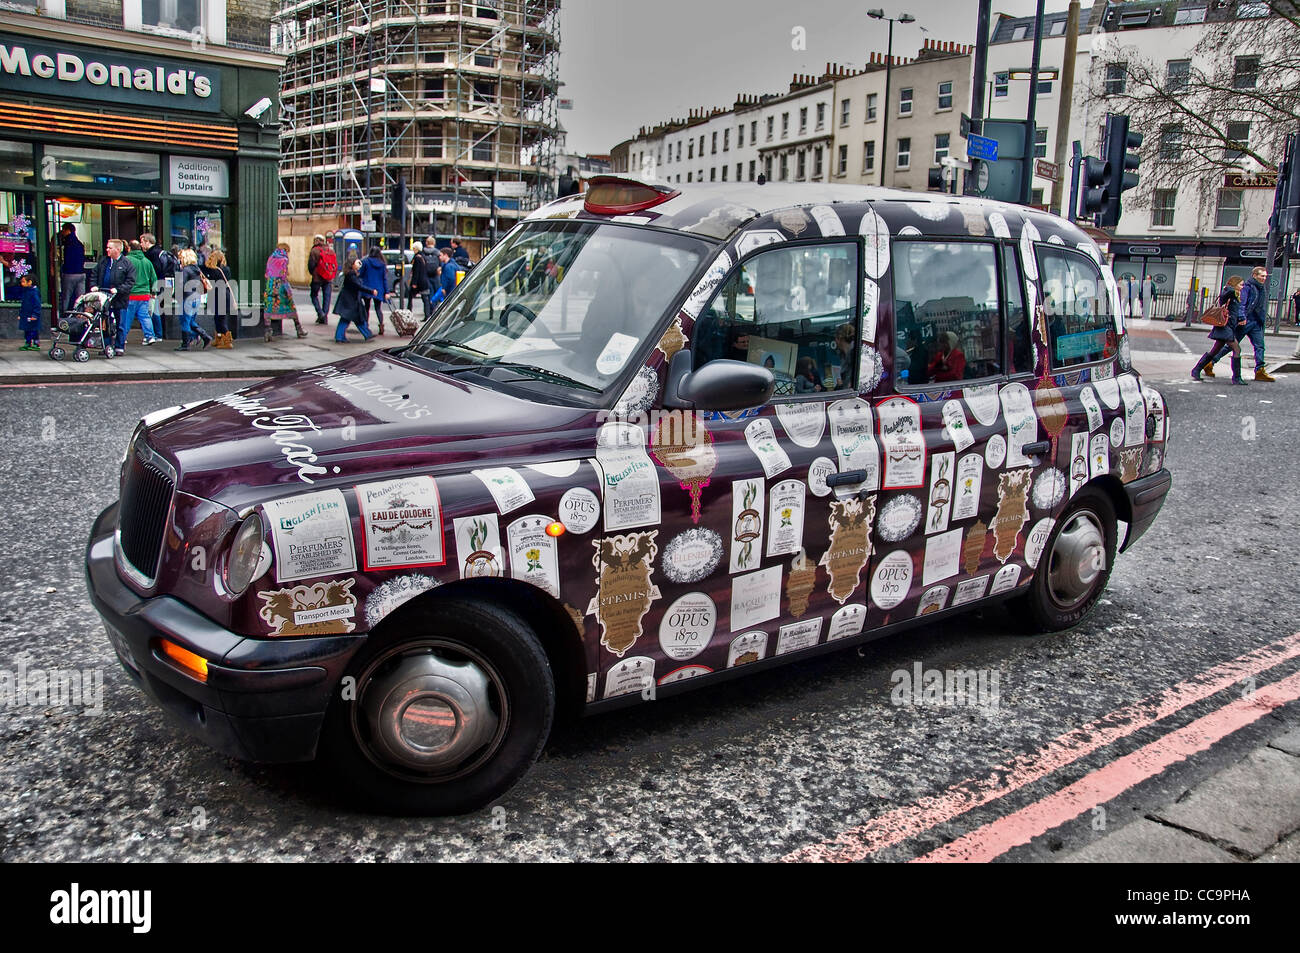 Scented Penhaligon's cab in front of Queensway tube station - London (UK) Stock Photo